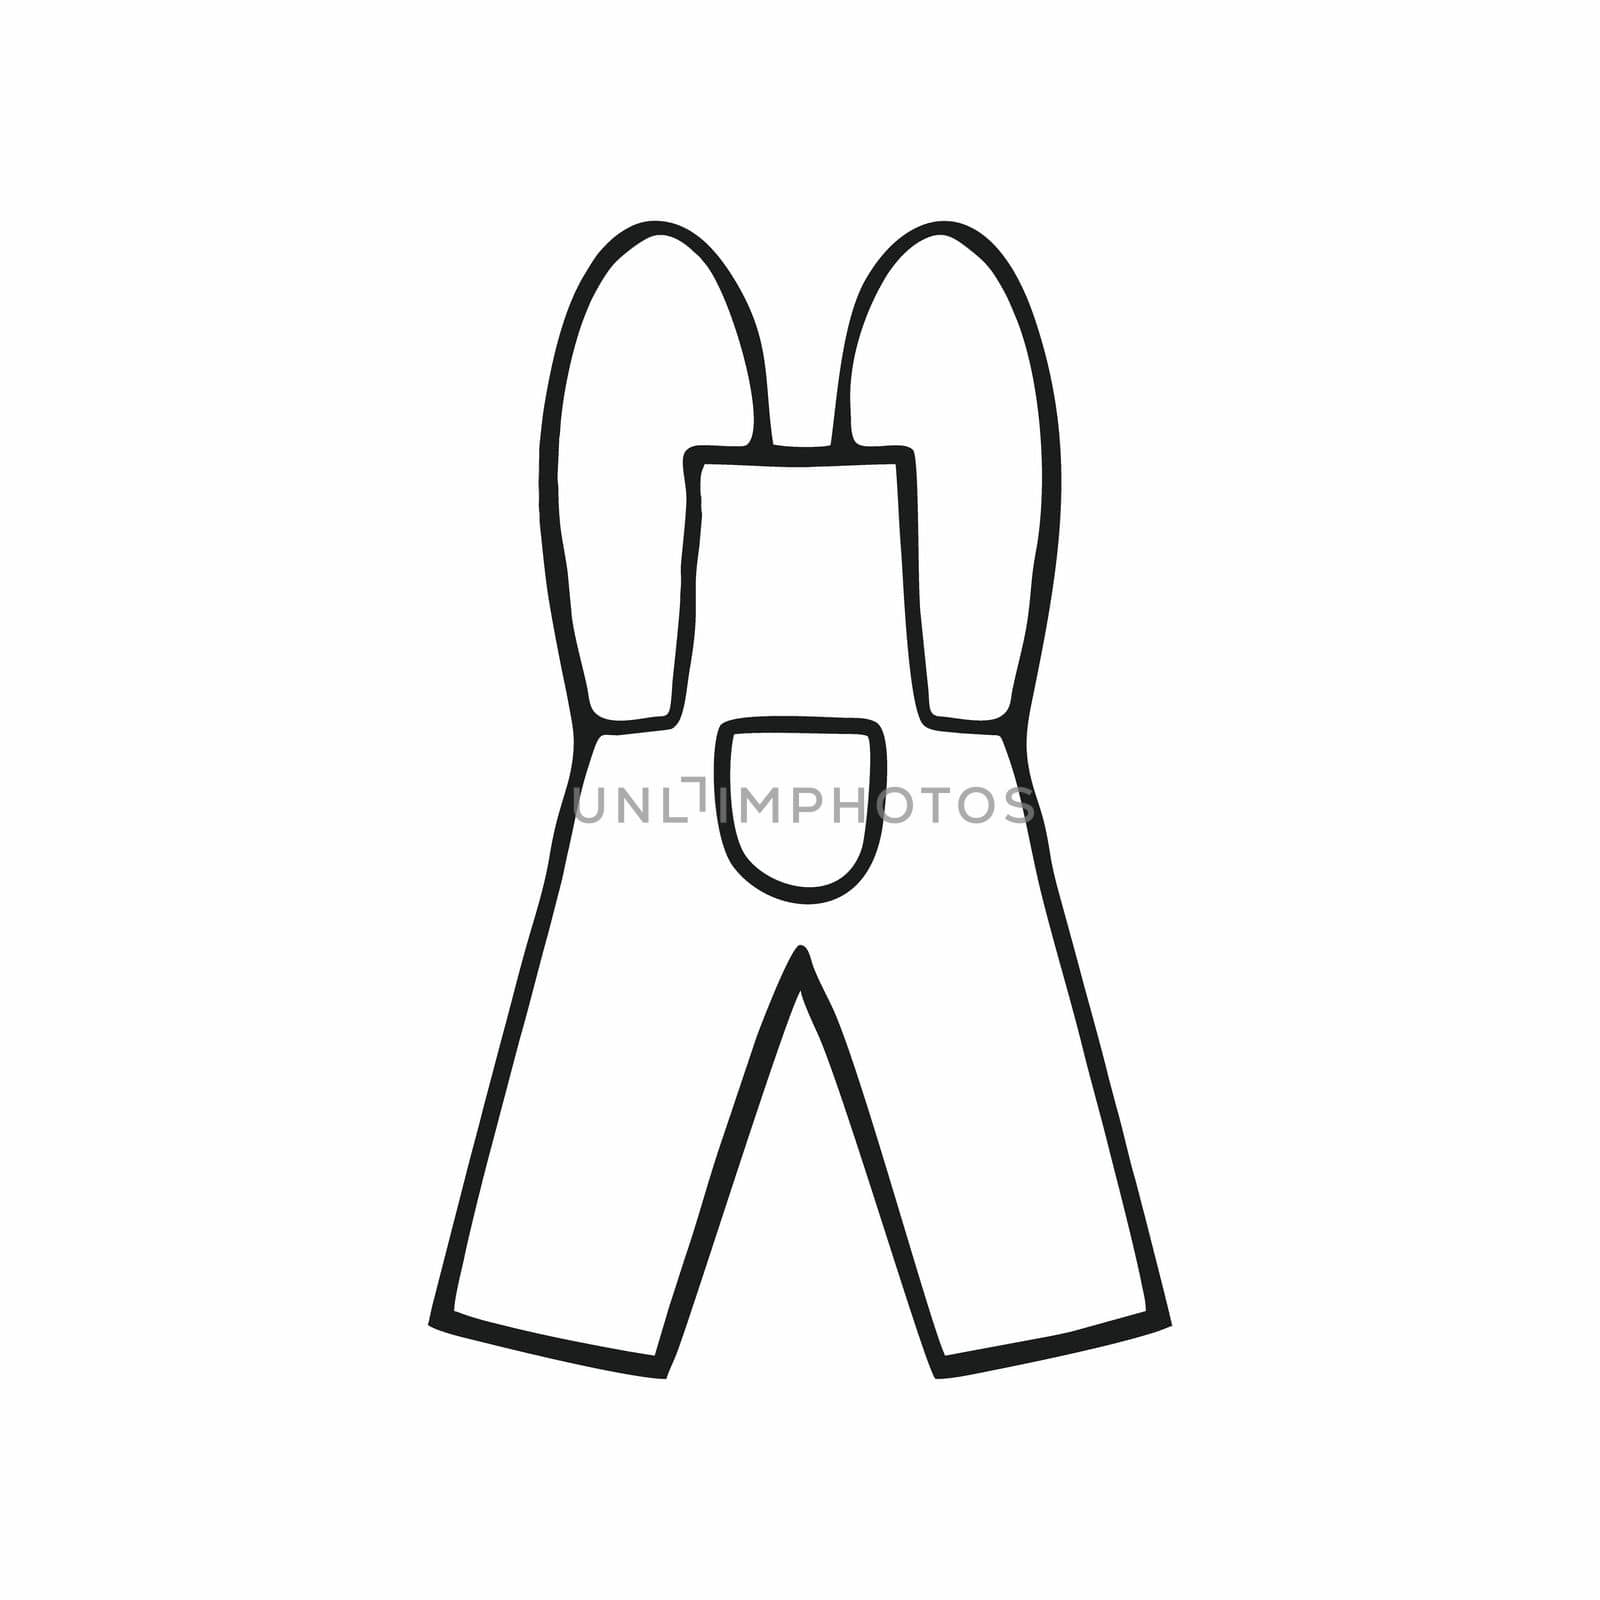 Children's jumpsuit with pants drawn by hand. Vector icon of children's clothing isolated on a white background. Contour Doodle illustration for stickers, booklets, and postcards. Things for newborns. by polinka_art